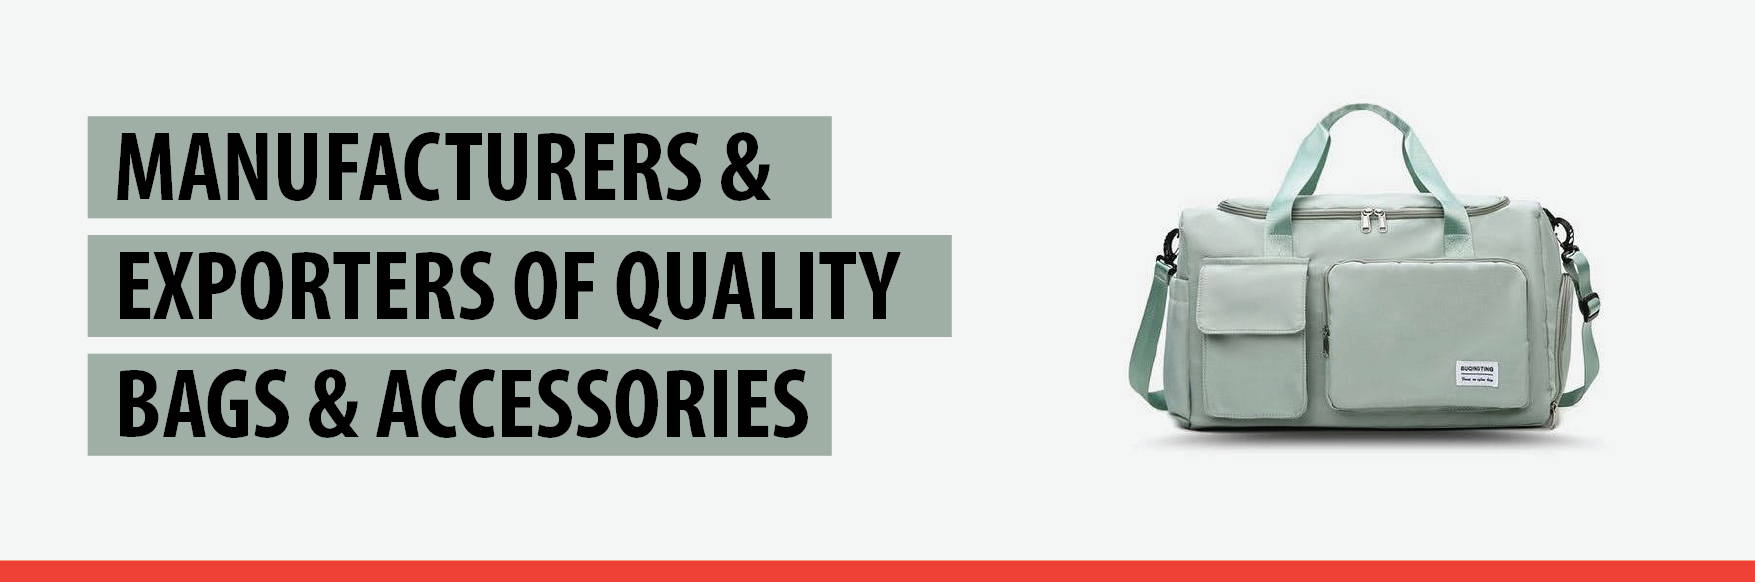 20+ Best Bag Manufacturers in China & How to Find Them [2019]